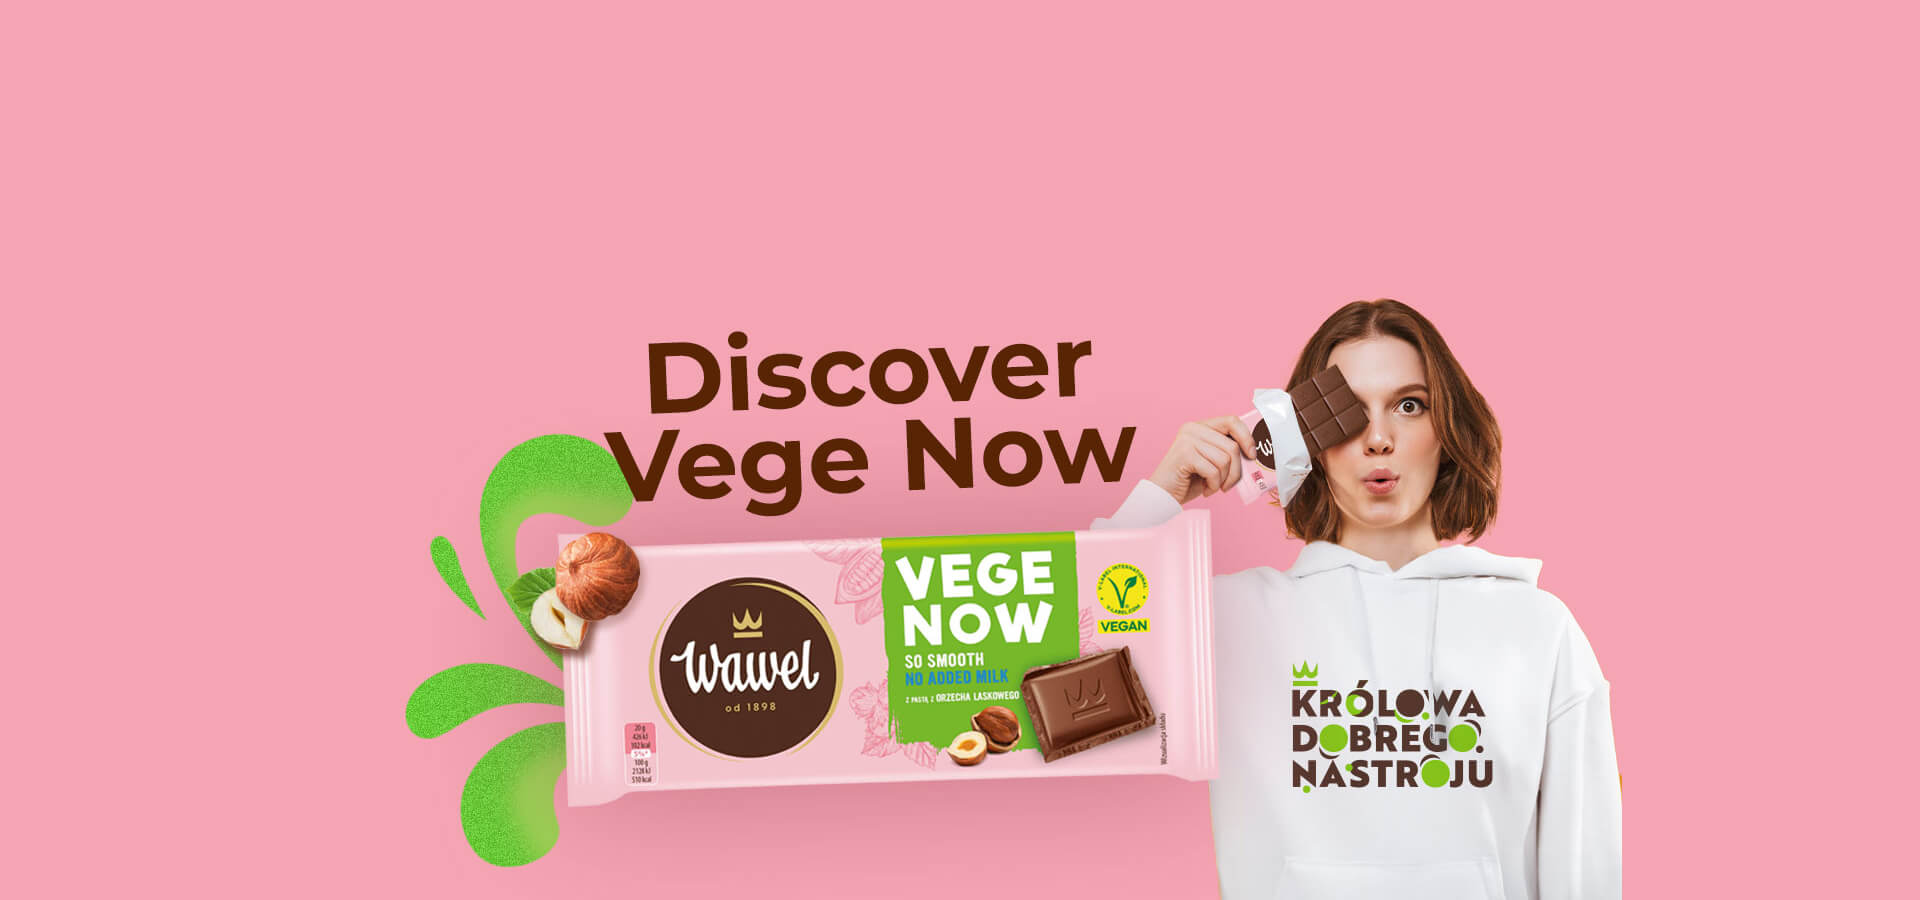 Discover Vege Now